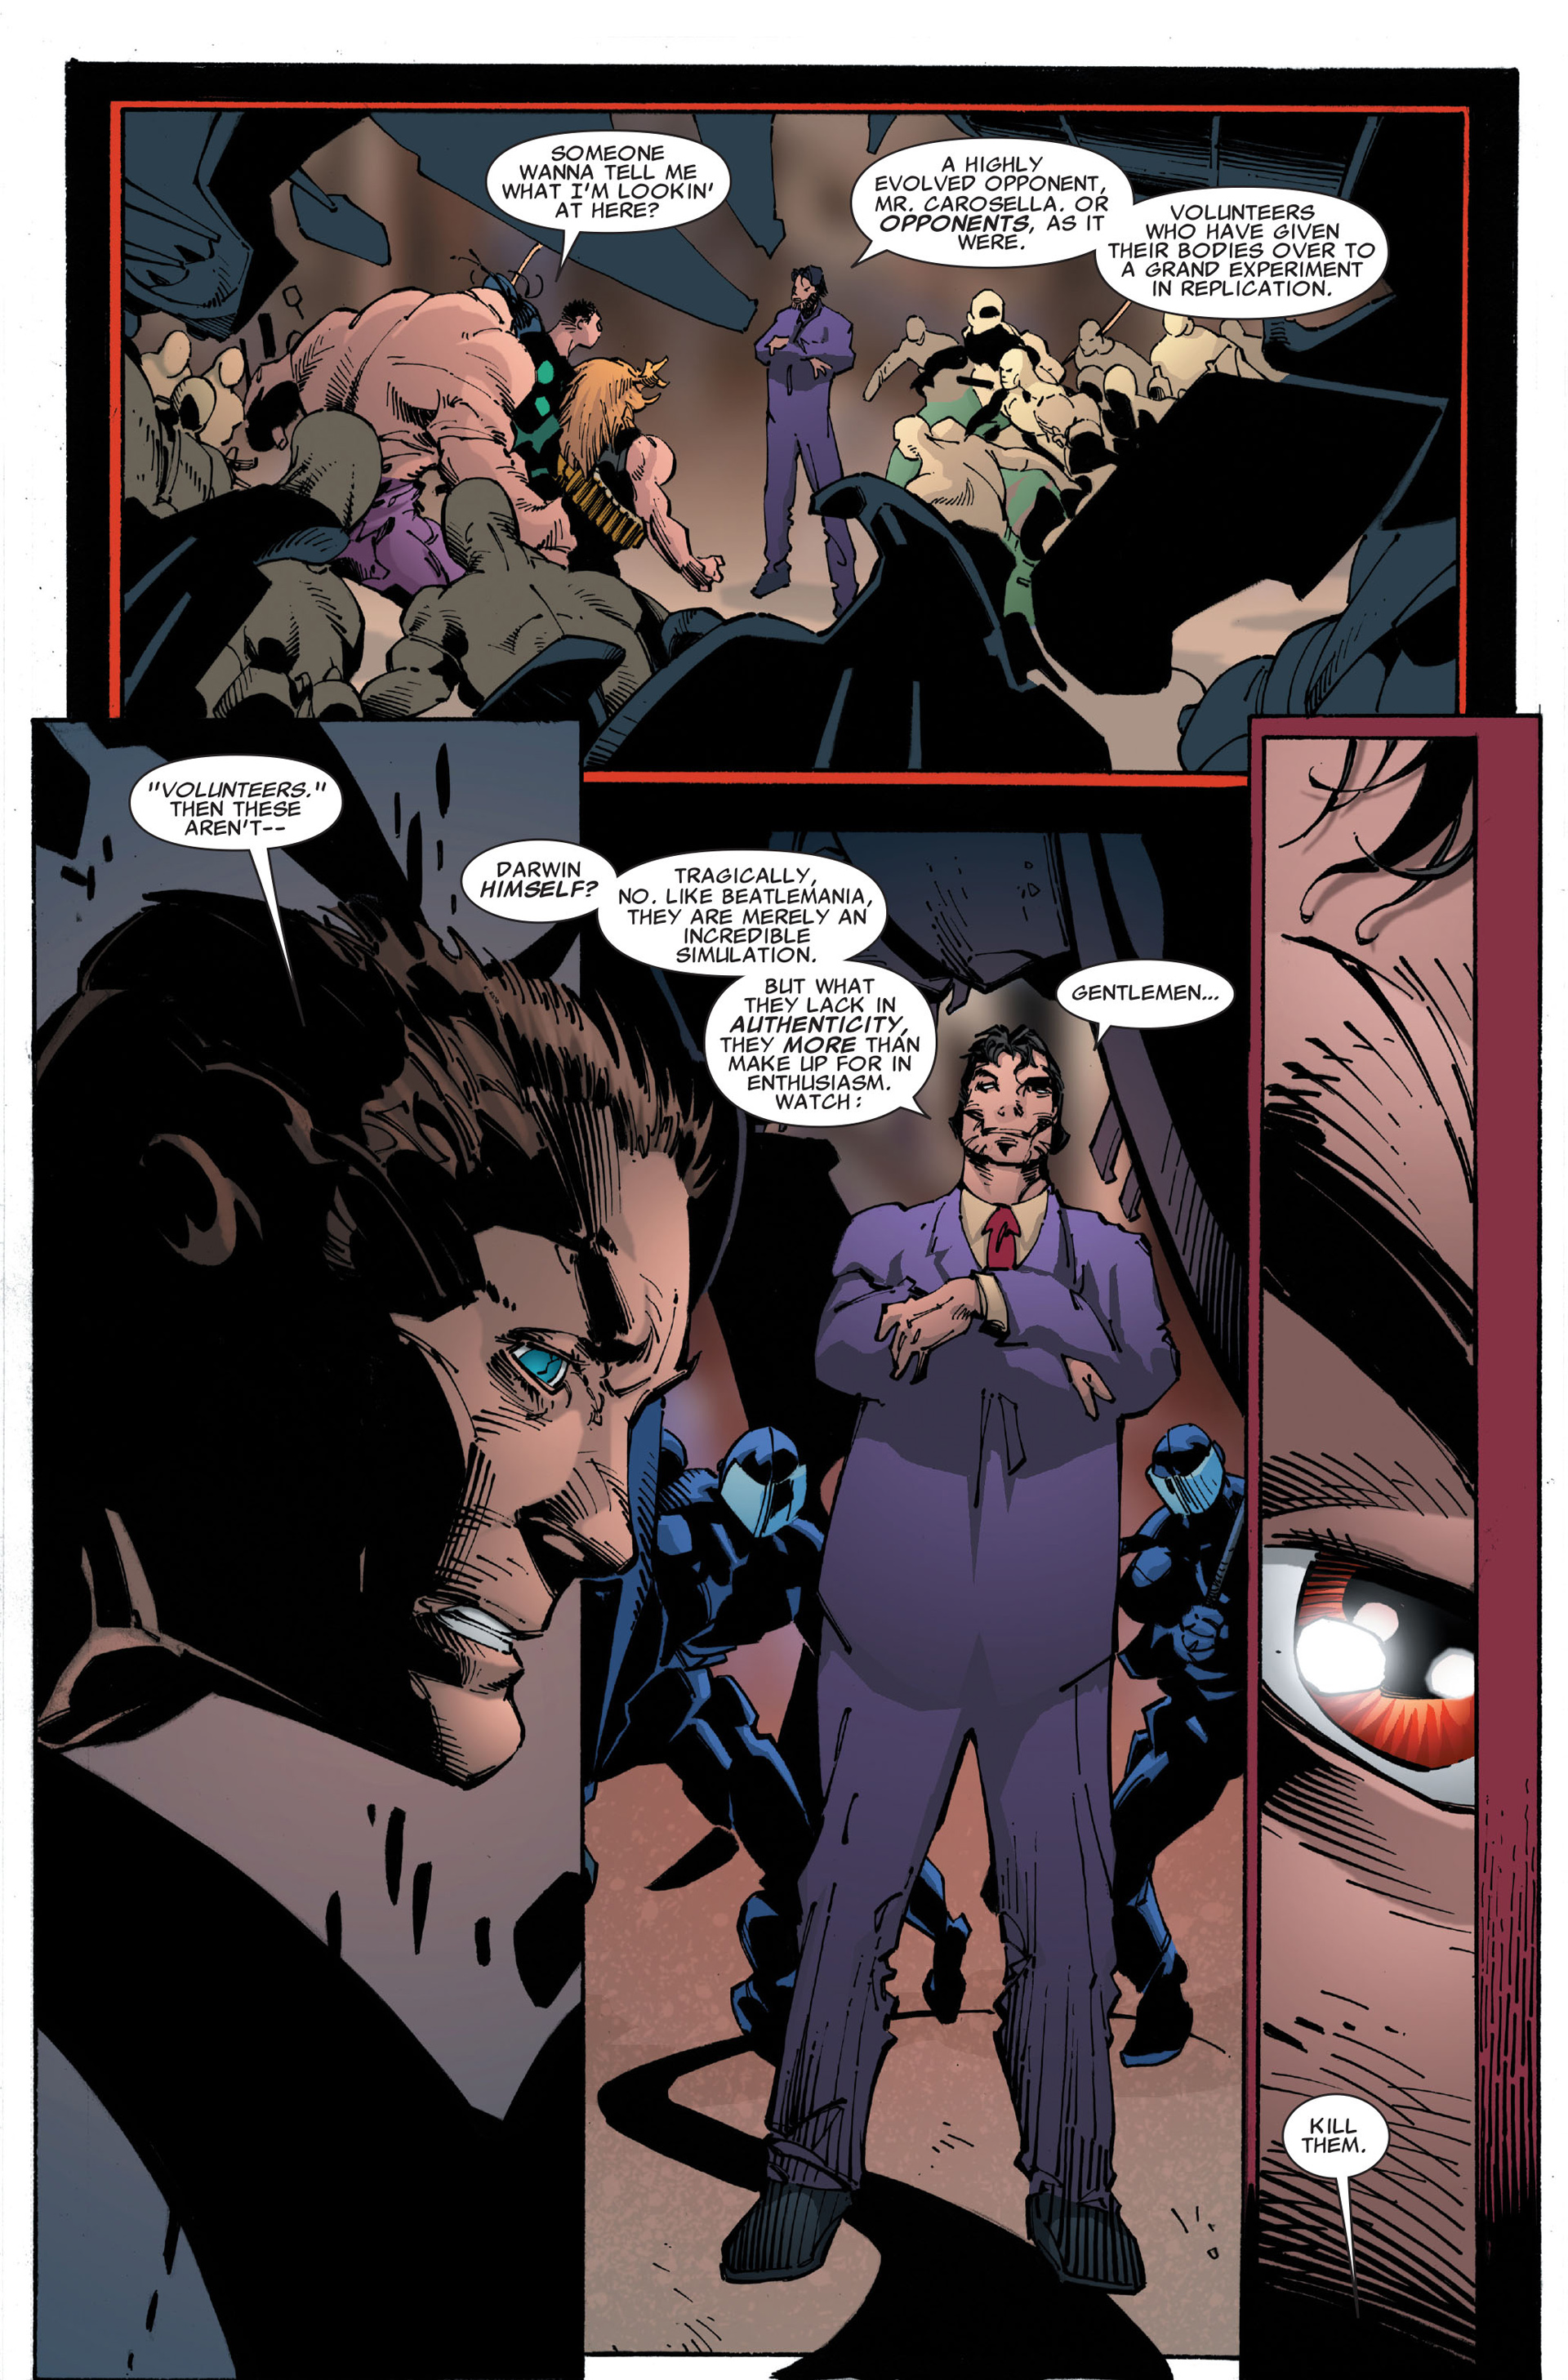 X-Factor (2006) 38 Page 3